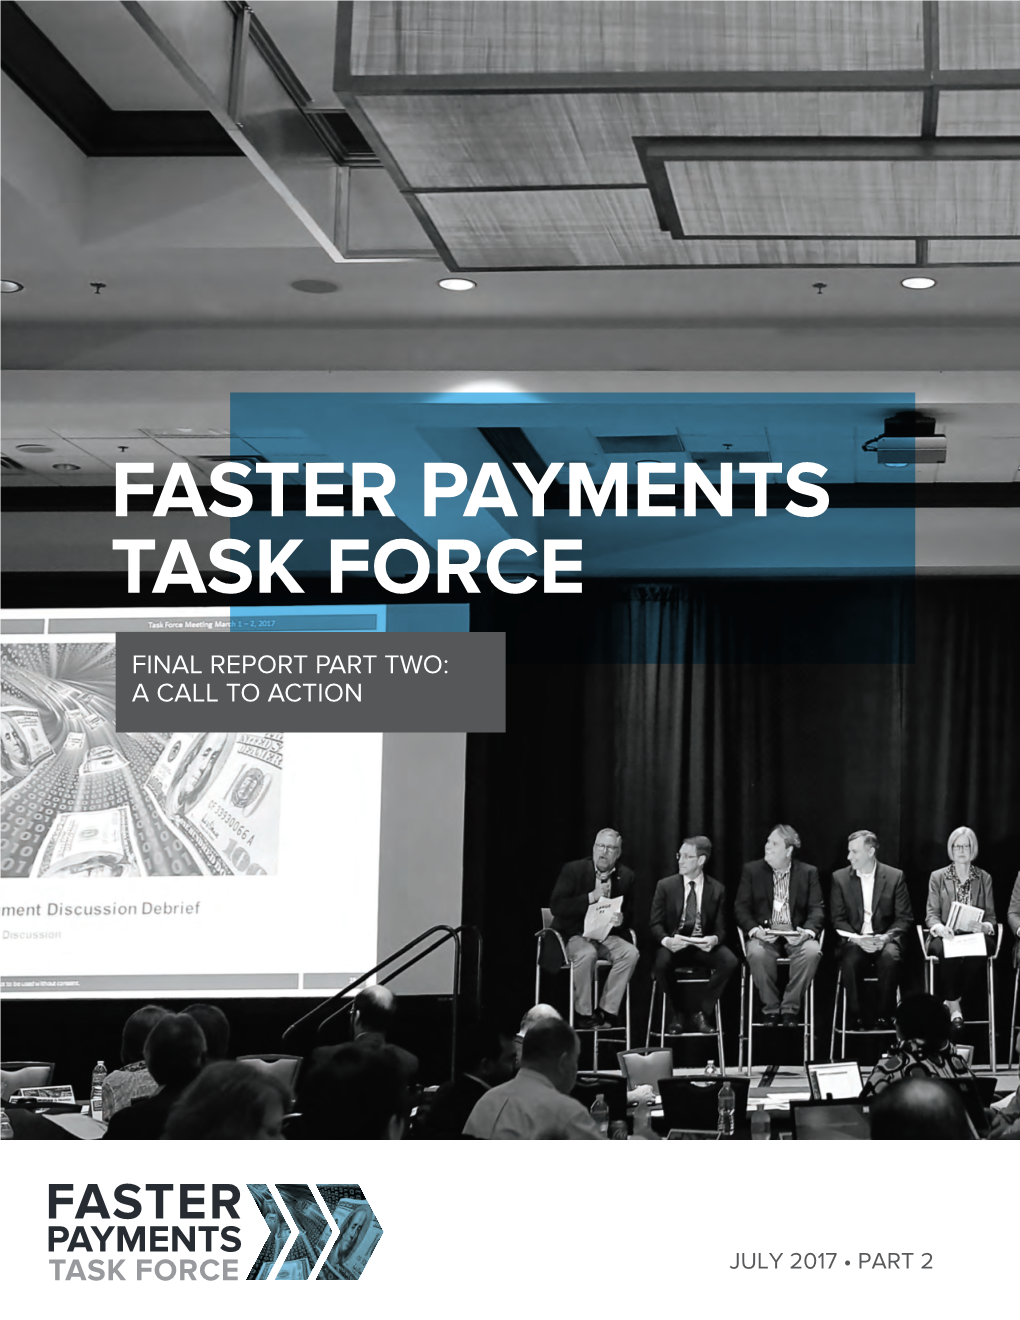 Faster Payments Task Force, Final Report Part Two: a Call to Action